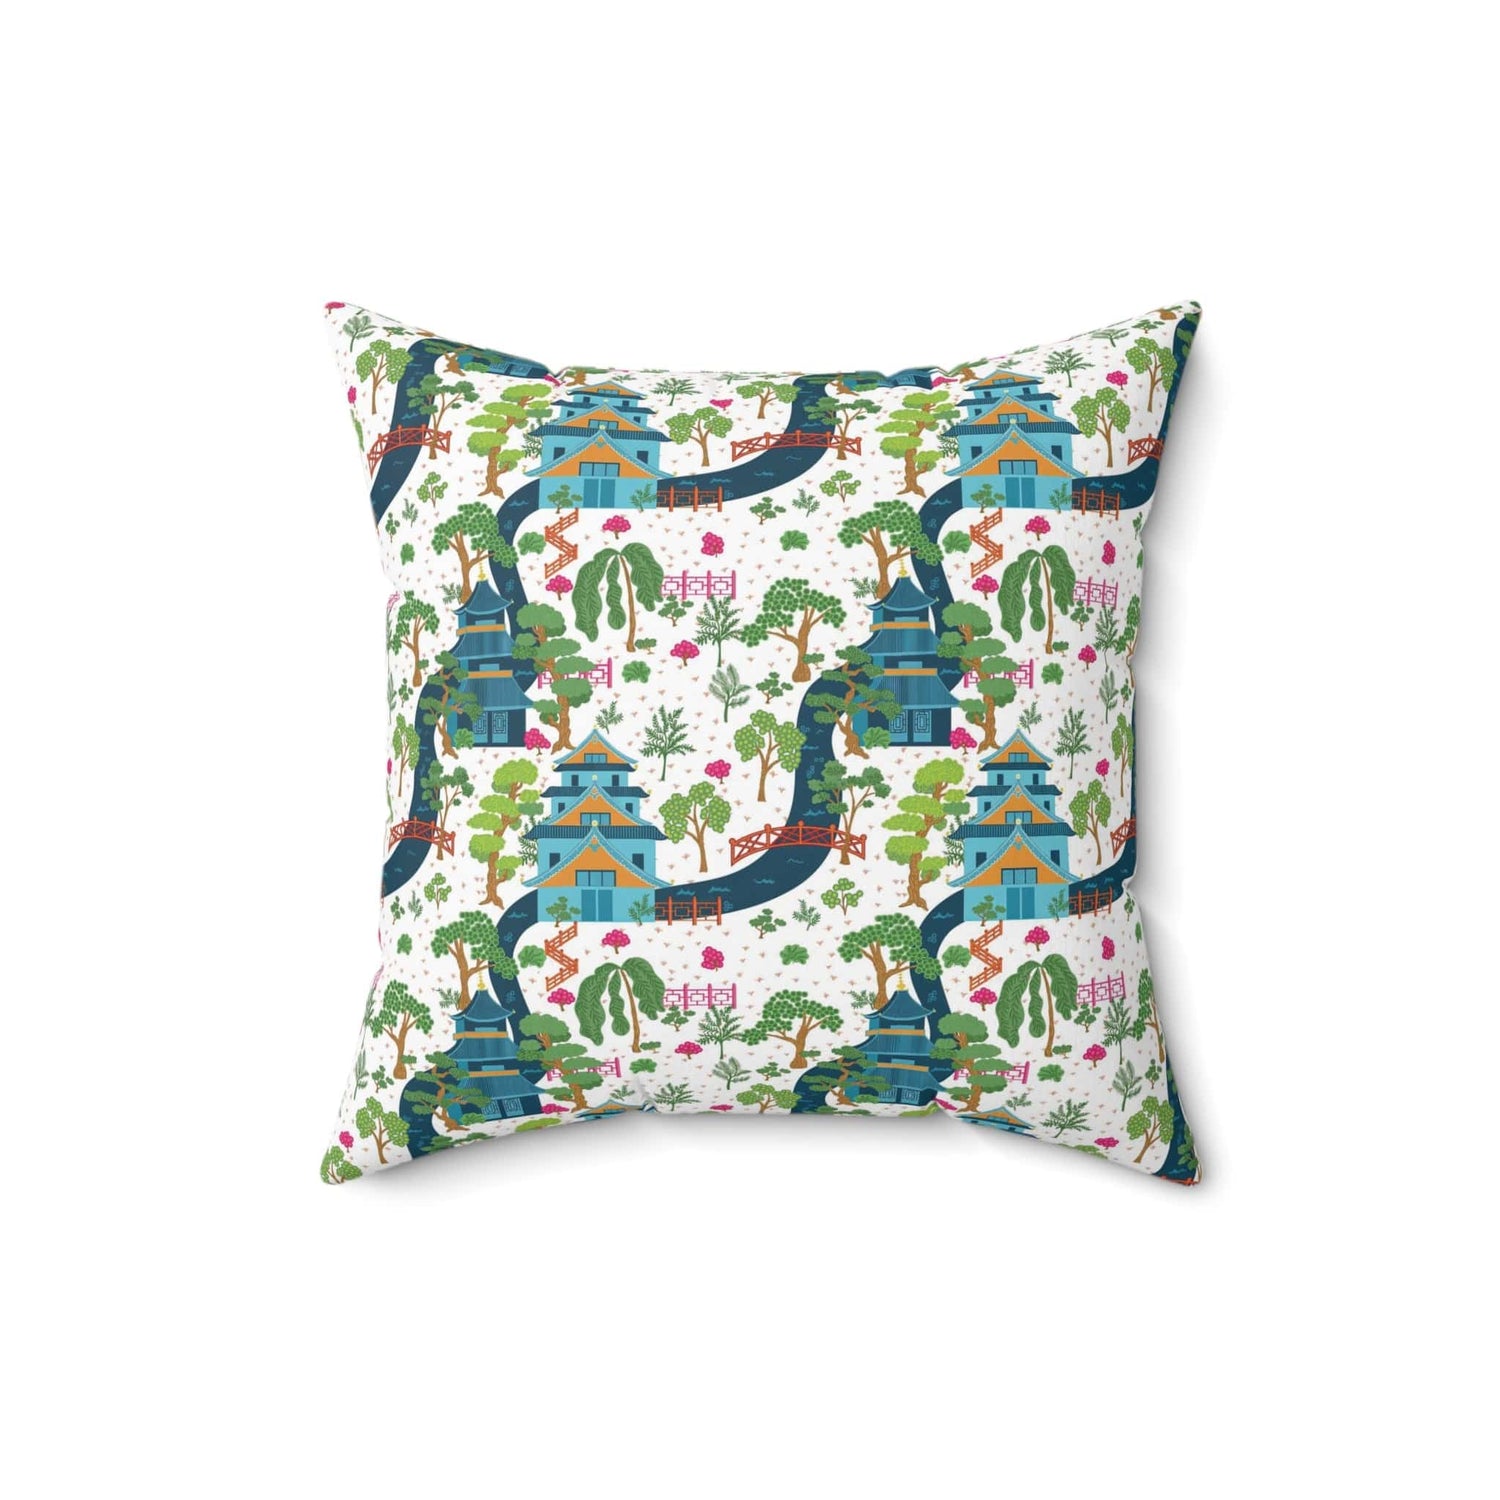 Kate McEnroe New York Chinoiserie Pagoda Garden Pillow with Insert, Oriental Scenic Cushion, Asian-Inspired Throw Pillow KM13819925 Throw Pillows 16&quot; × 16&quot; 17309563127731726252